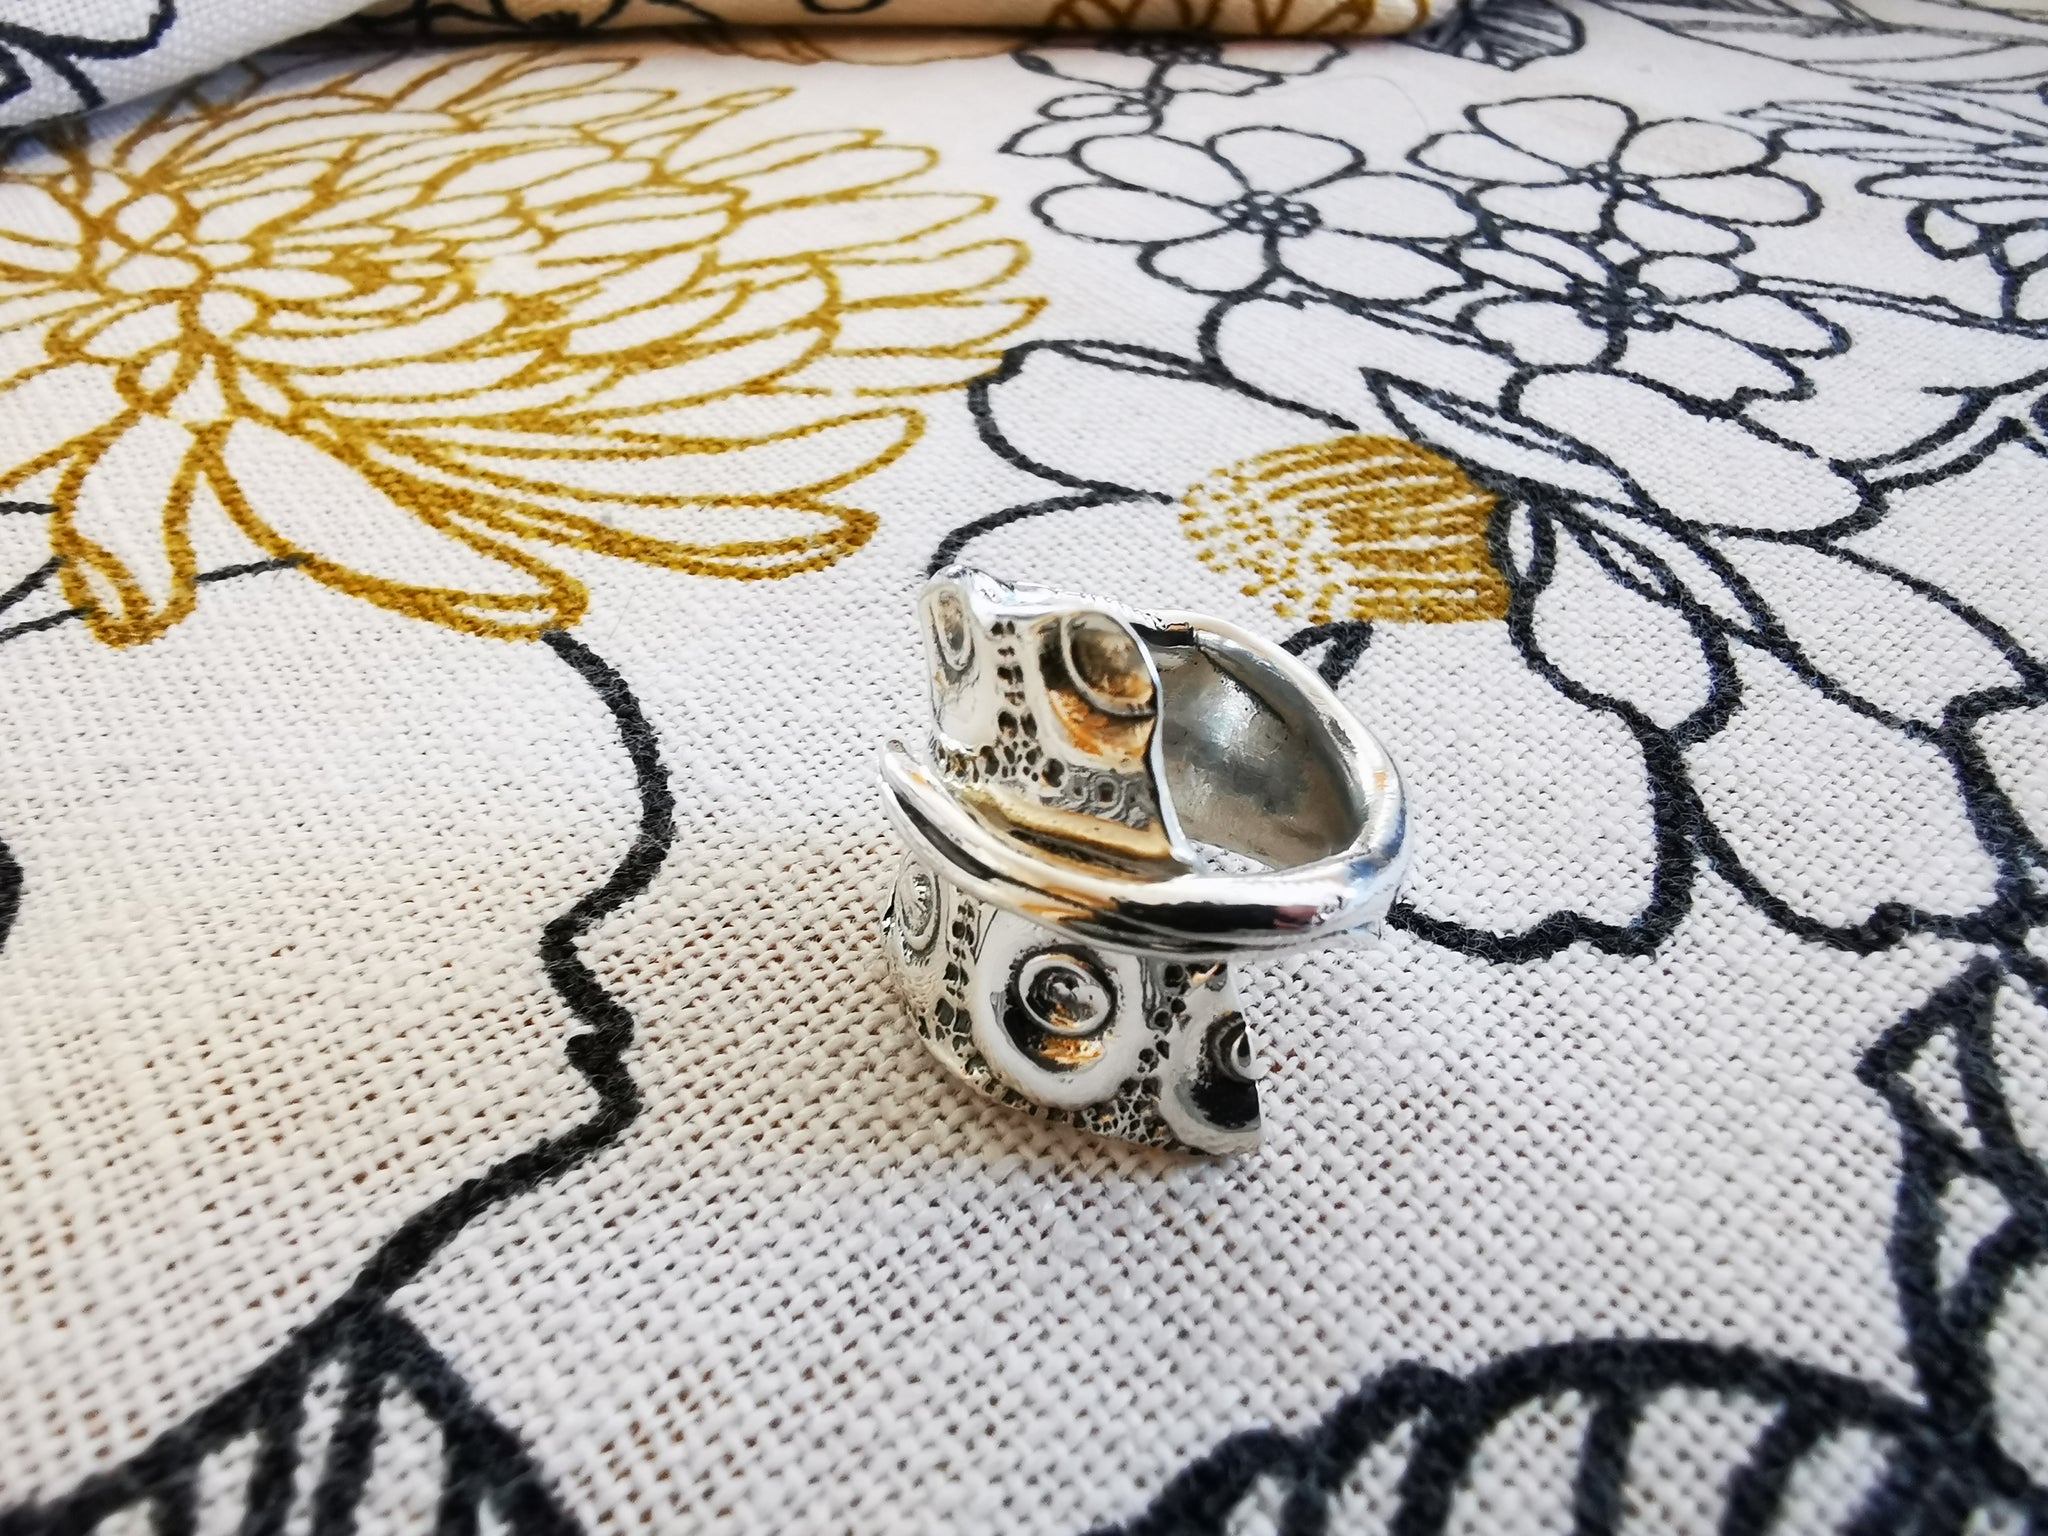 UNIQUE SEA WAVE, original sterling silver ring inspired by a sea urchin shell